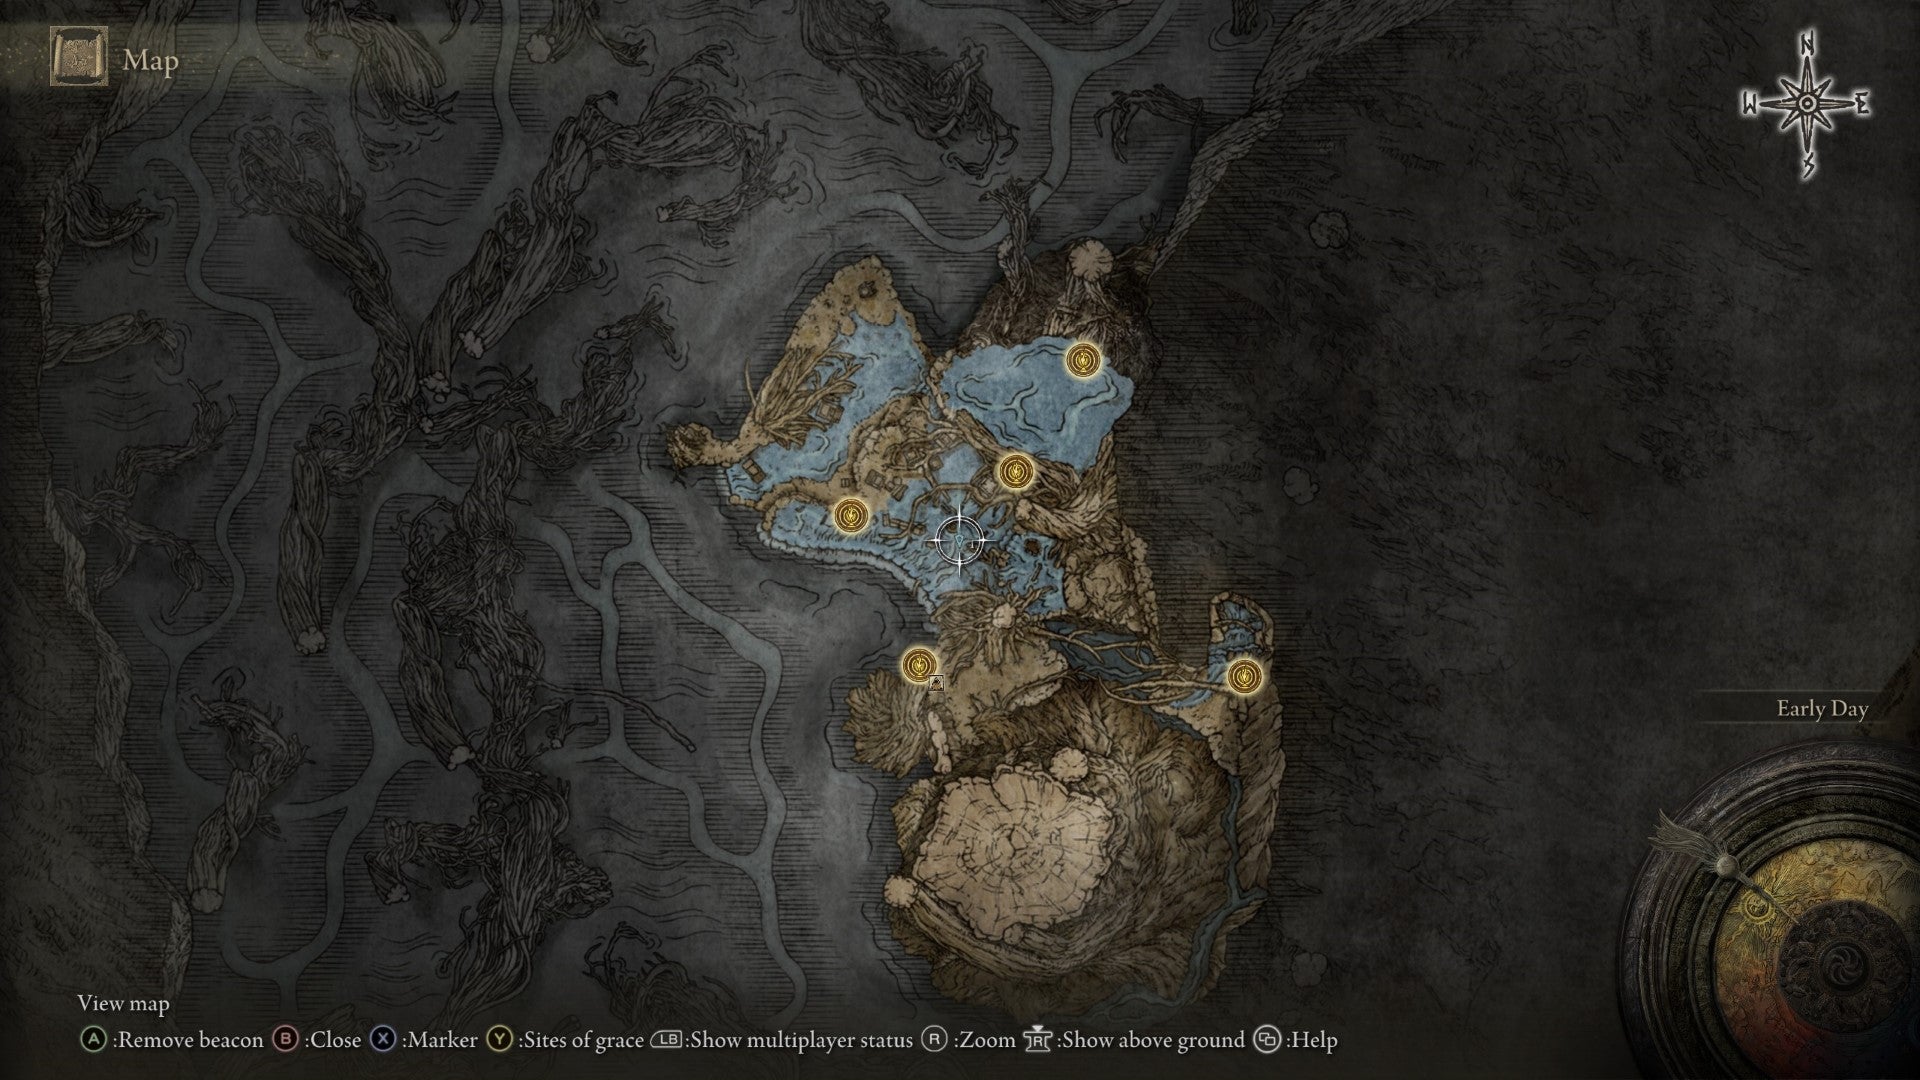 The location of the Deeproot Depths map fragment in Elden Ring